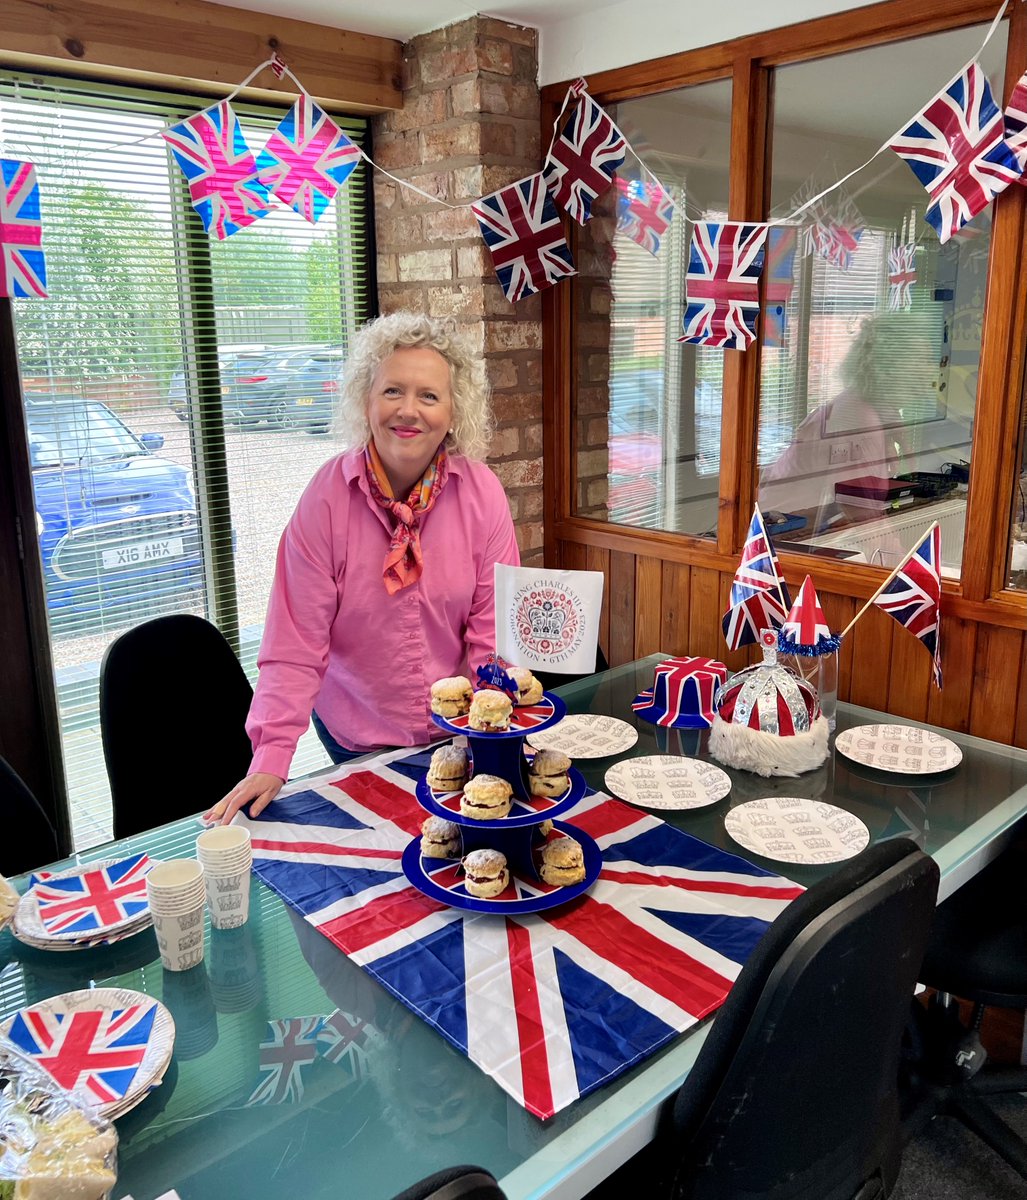 Last month Christina helped one of our clients host their Coronation celebrations as a part of their internal marketing.

They had a fantastic time and enjoyed getting together to celebrate the best of British.

#Throwbackthursday #kingscoronation #internalmarketing